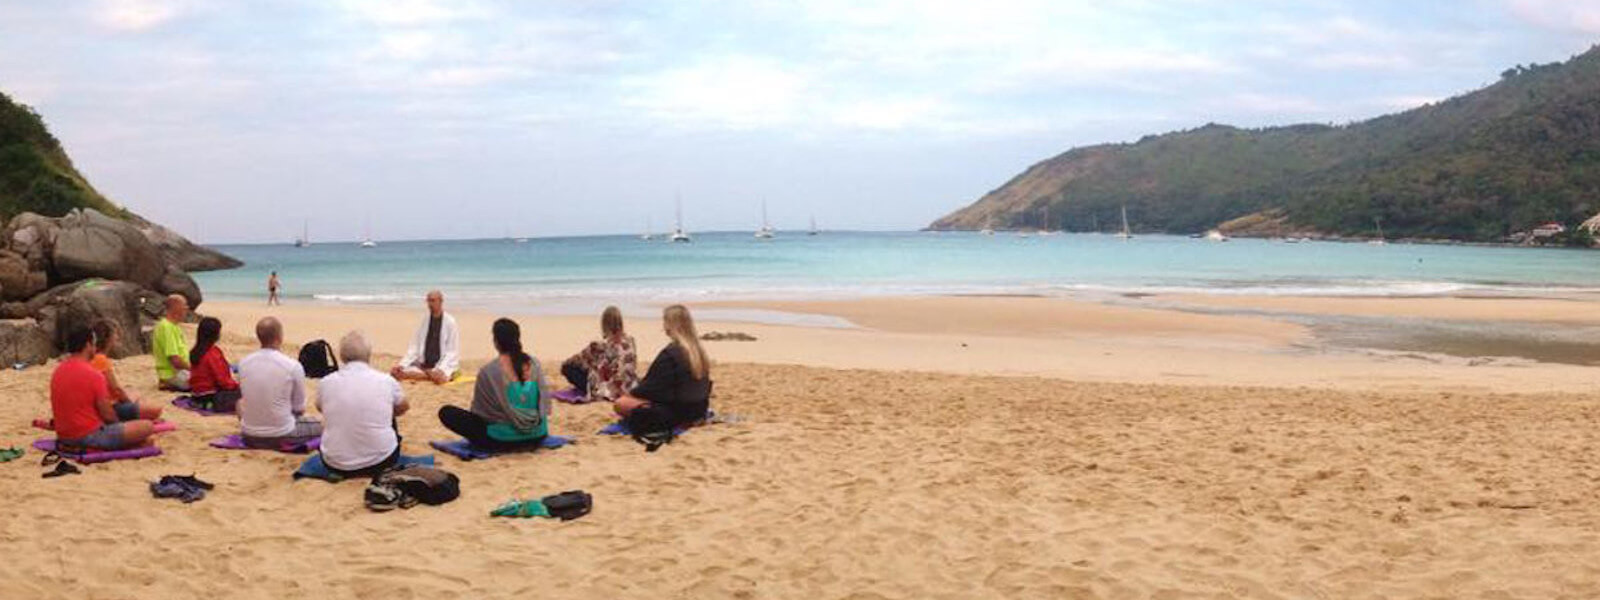 Ten people meditate together at Naiharn Beach in Phuket during a retreat.